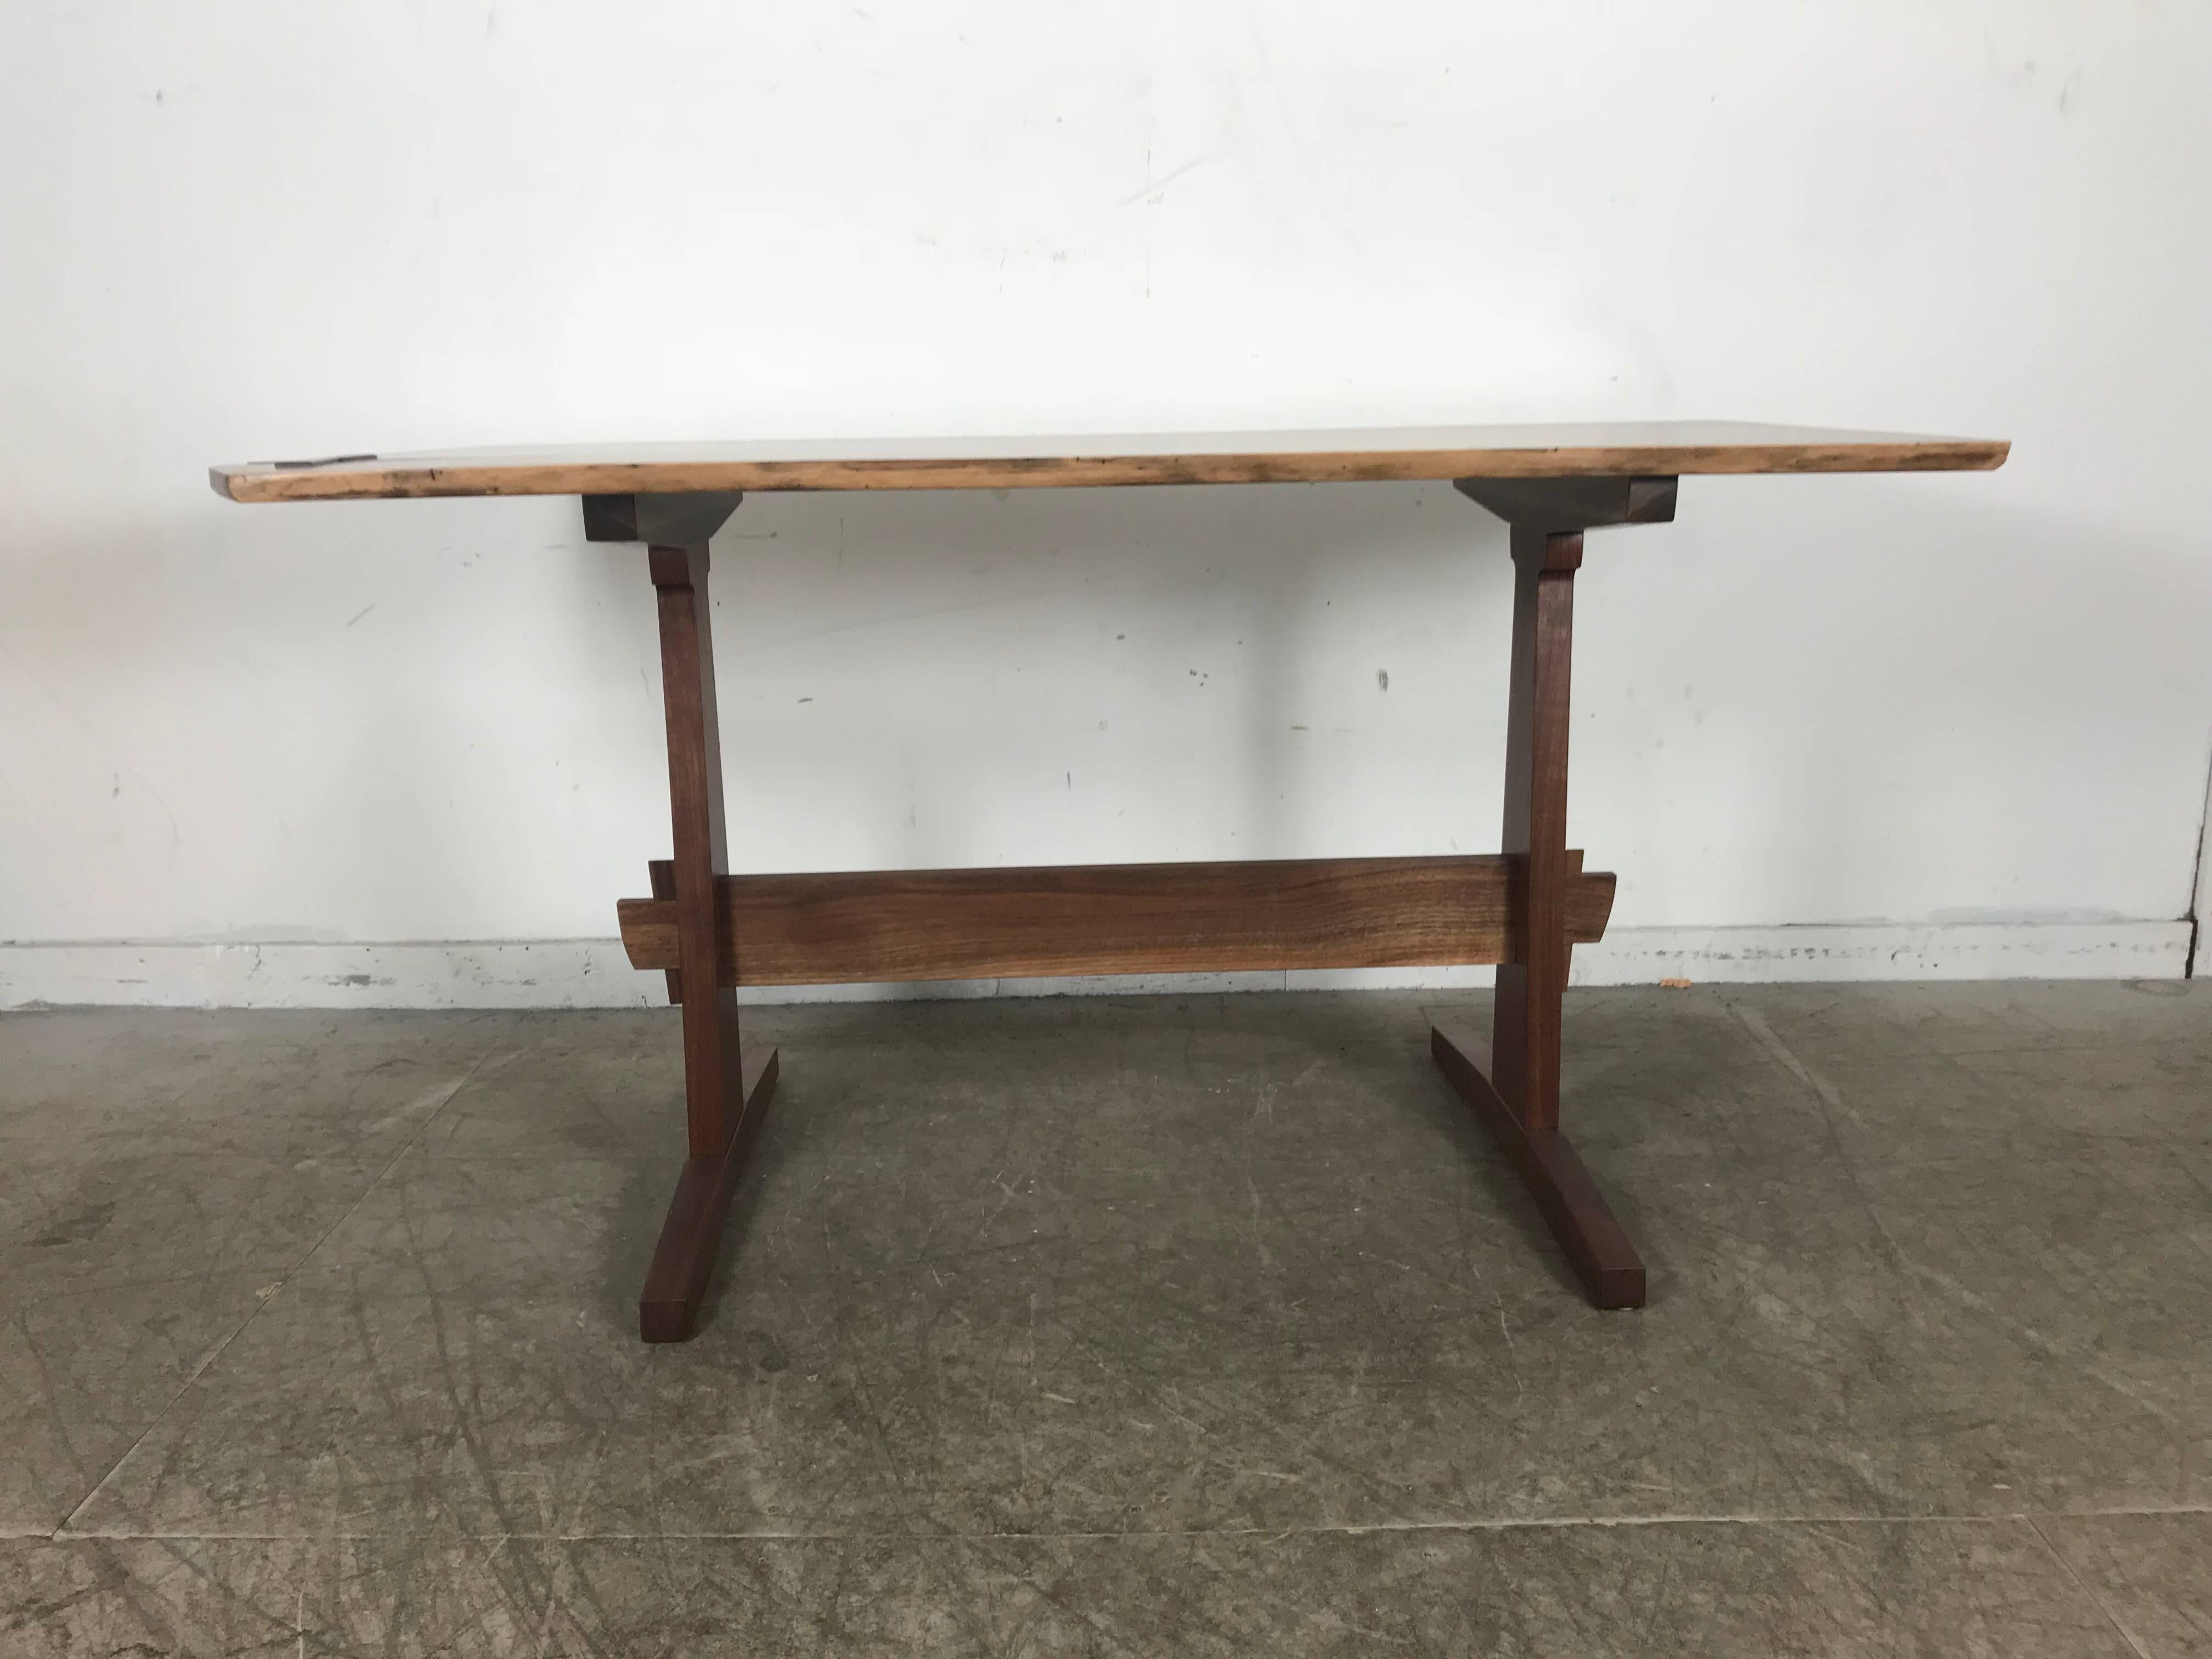 Griff Logan workshop studio bench made free edge table or desk, solid walnut wood. Superior quality and construction, butterfly joint, mortis and tenon base construction in the manner of George Nakashima, stunning, hand delivery avail to New York